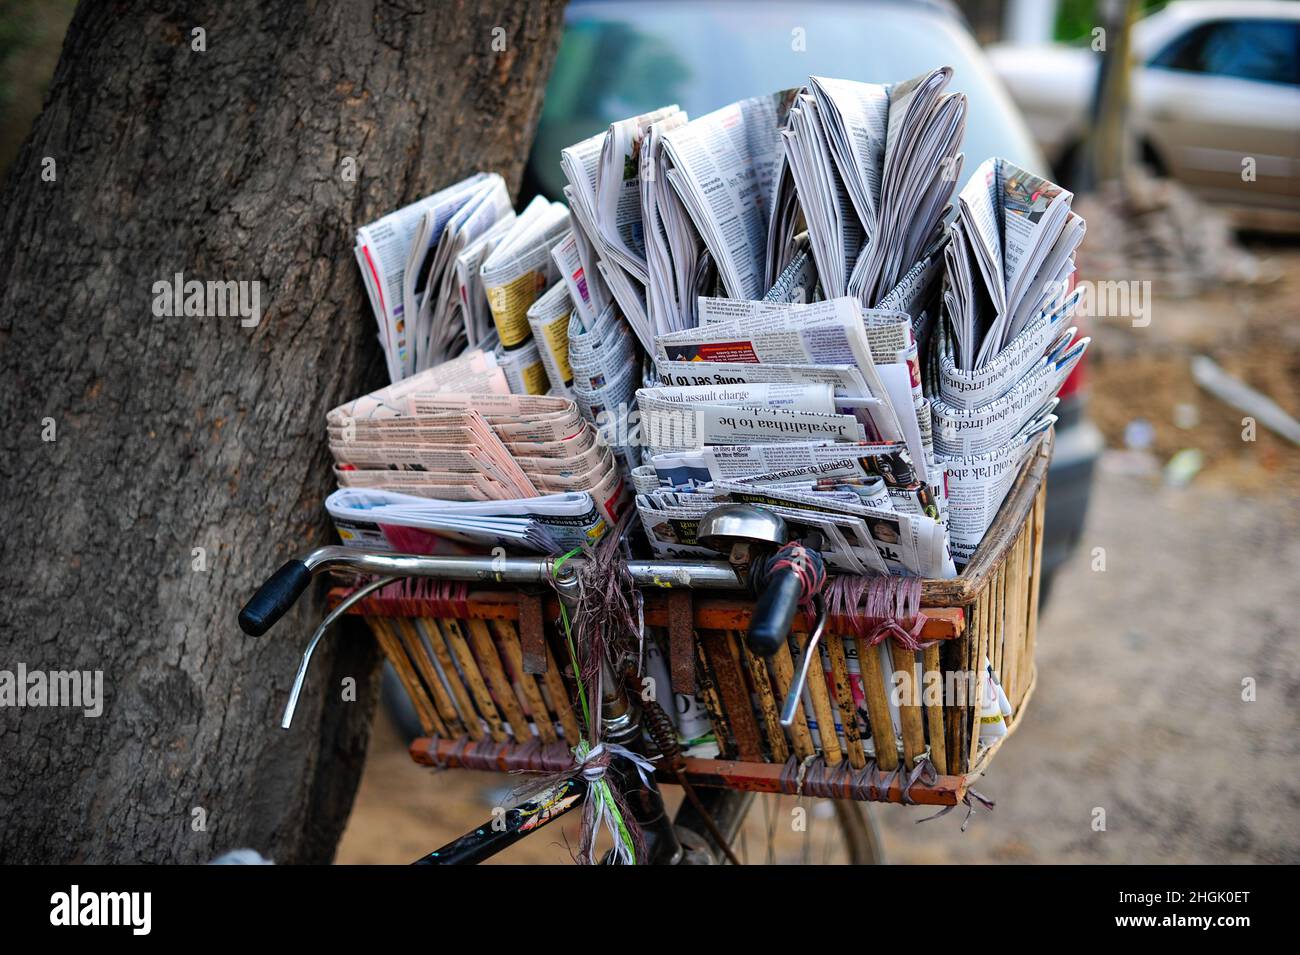 Newspapers for sale in a basket on a bike in Delhi, India, Asia. Stock Photo